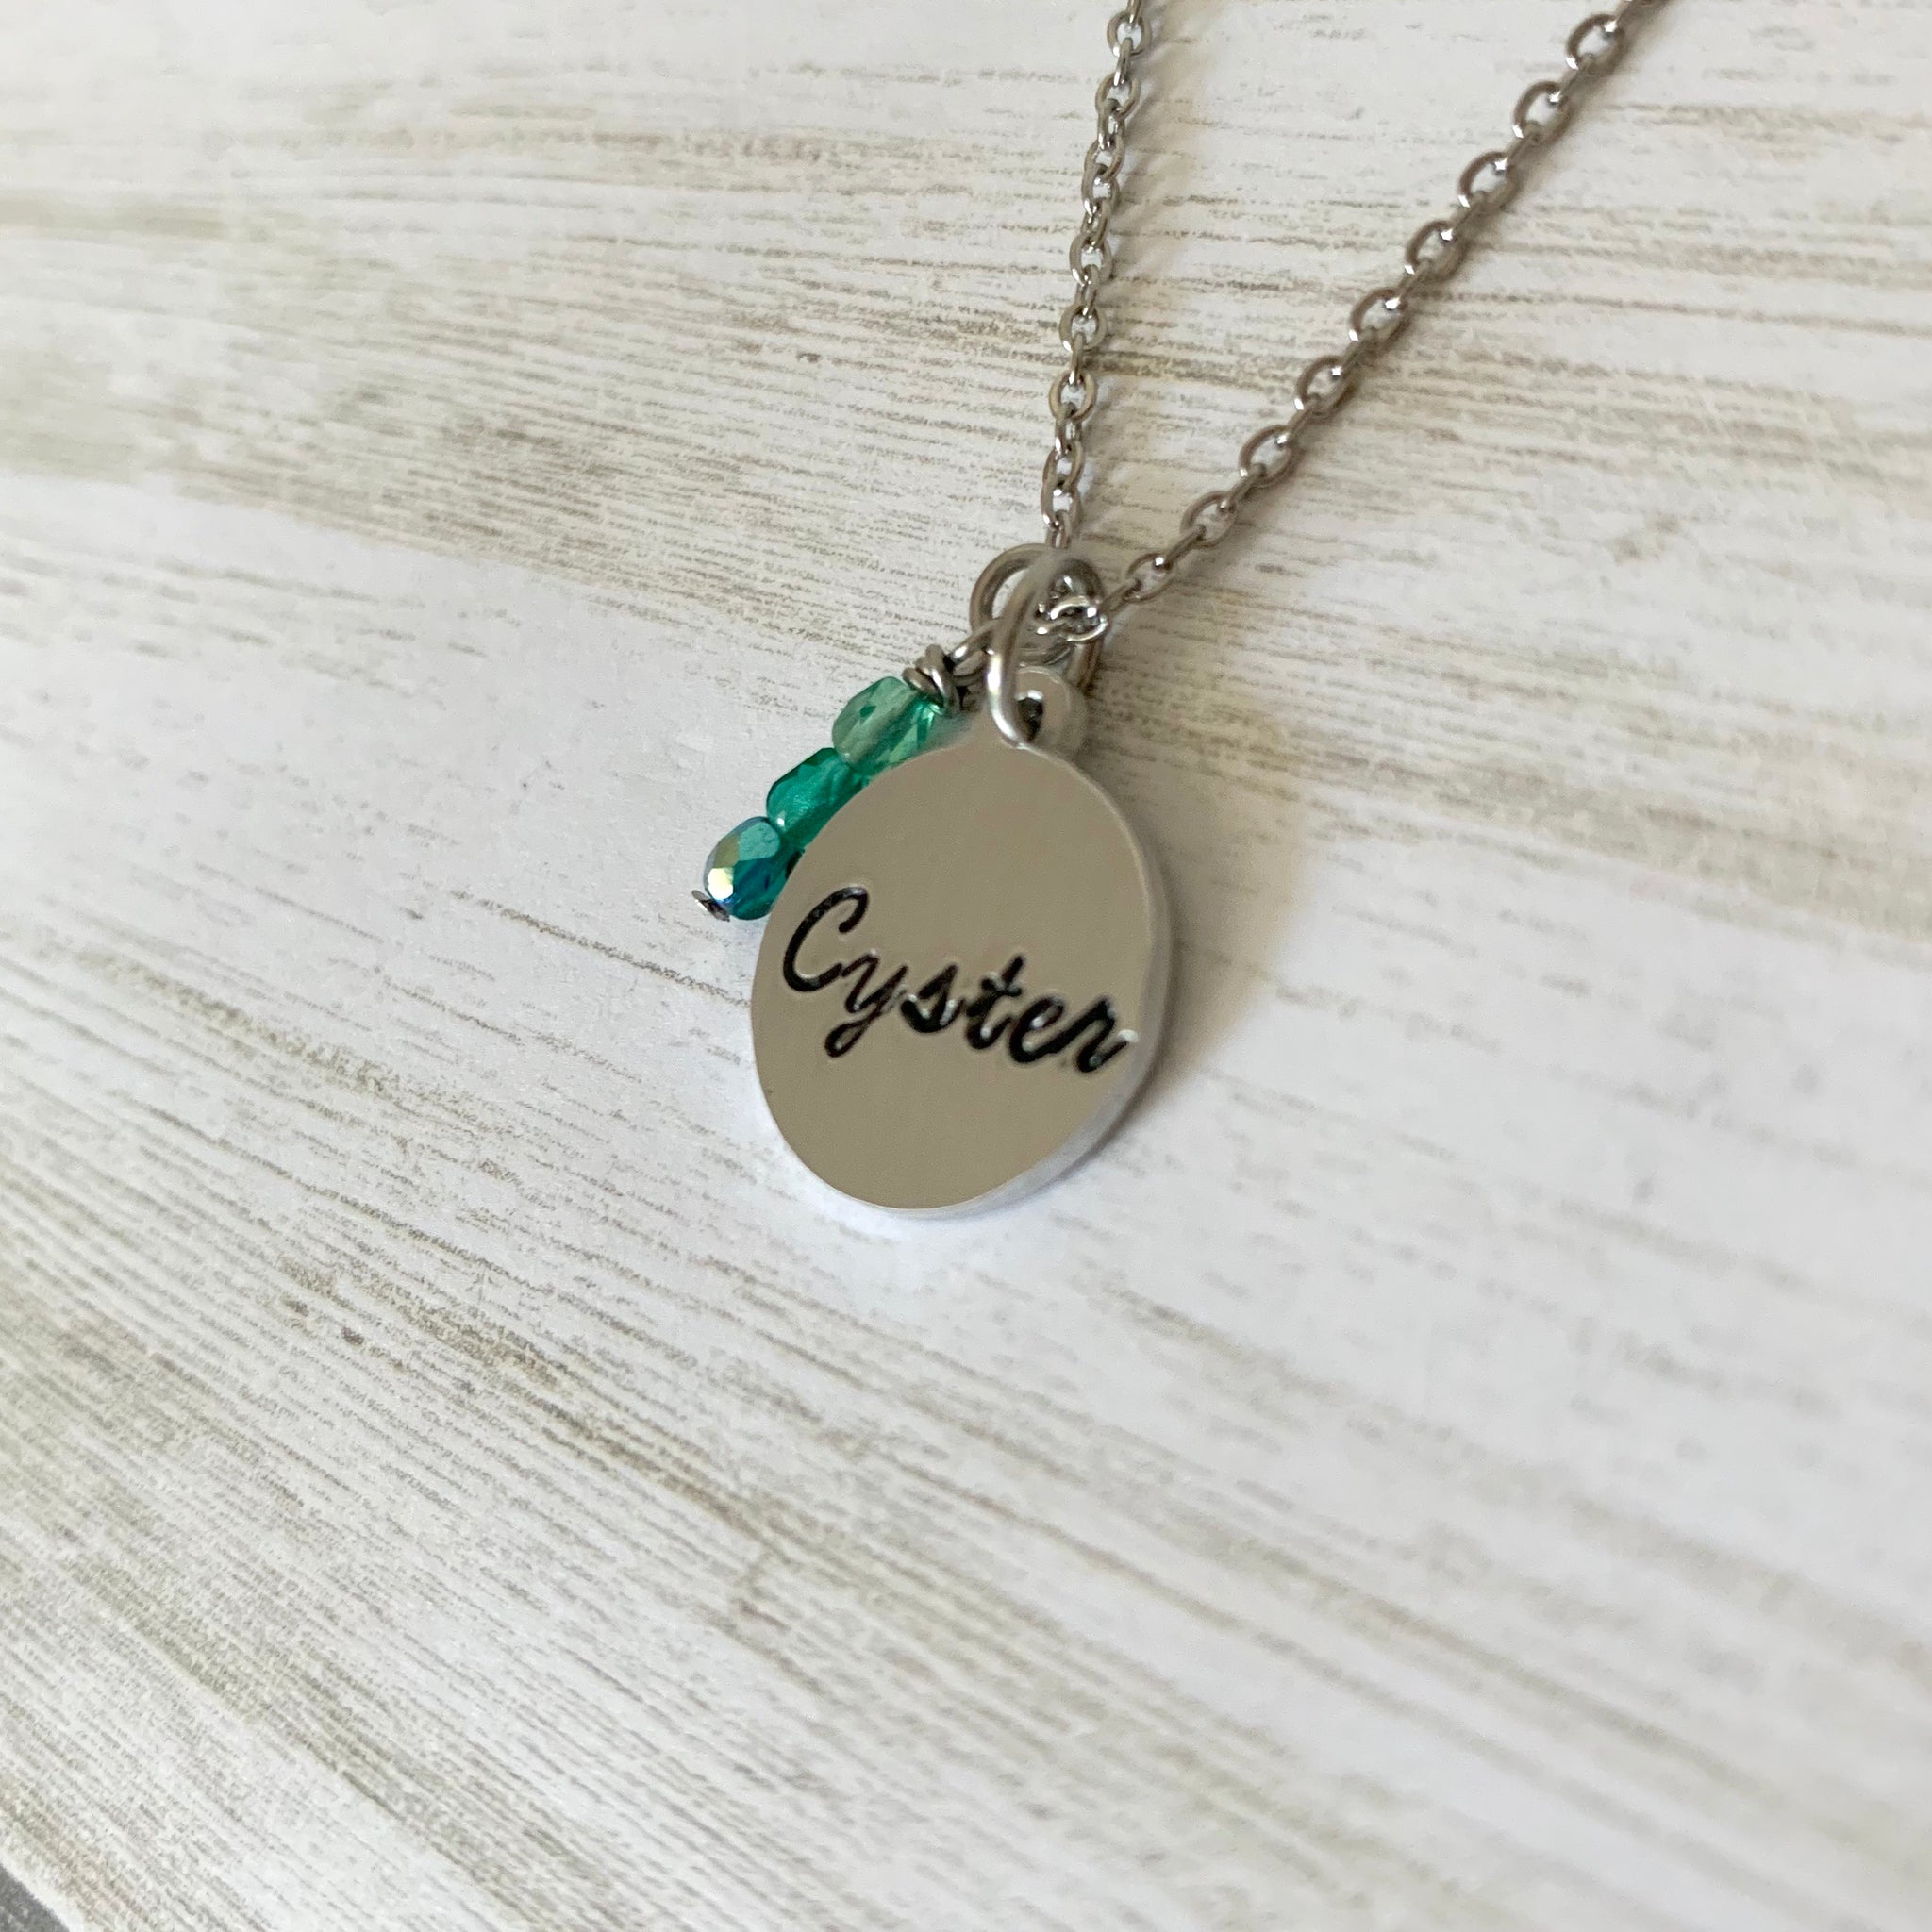 Cyster Necklace - SoulCysterCreations